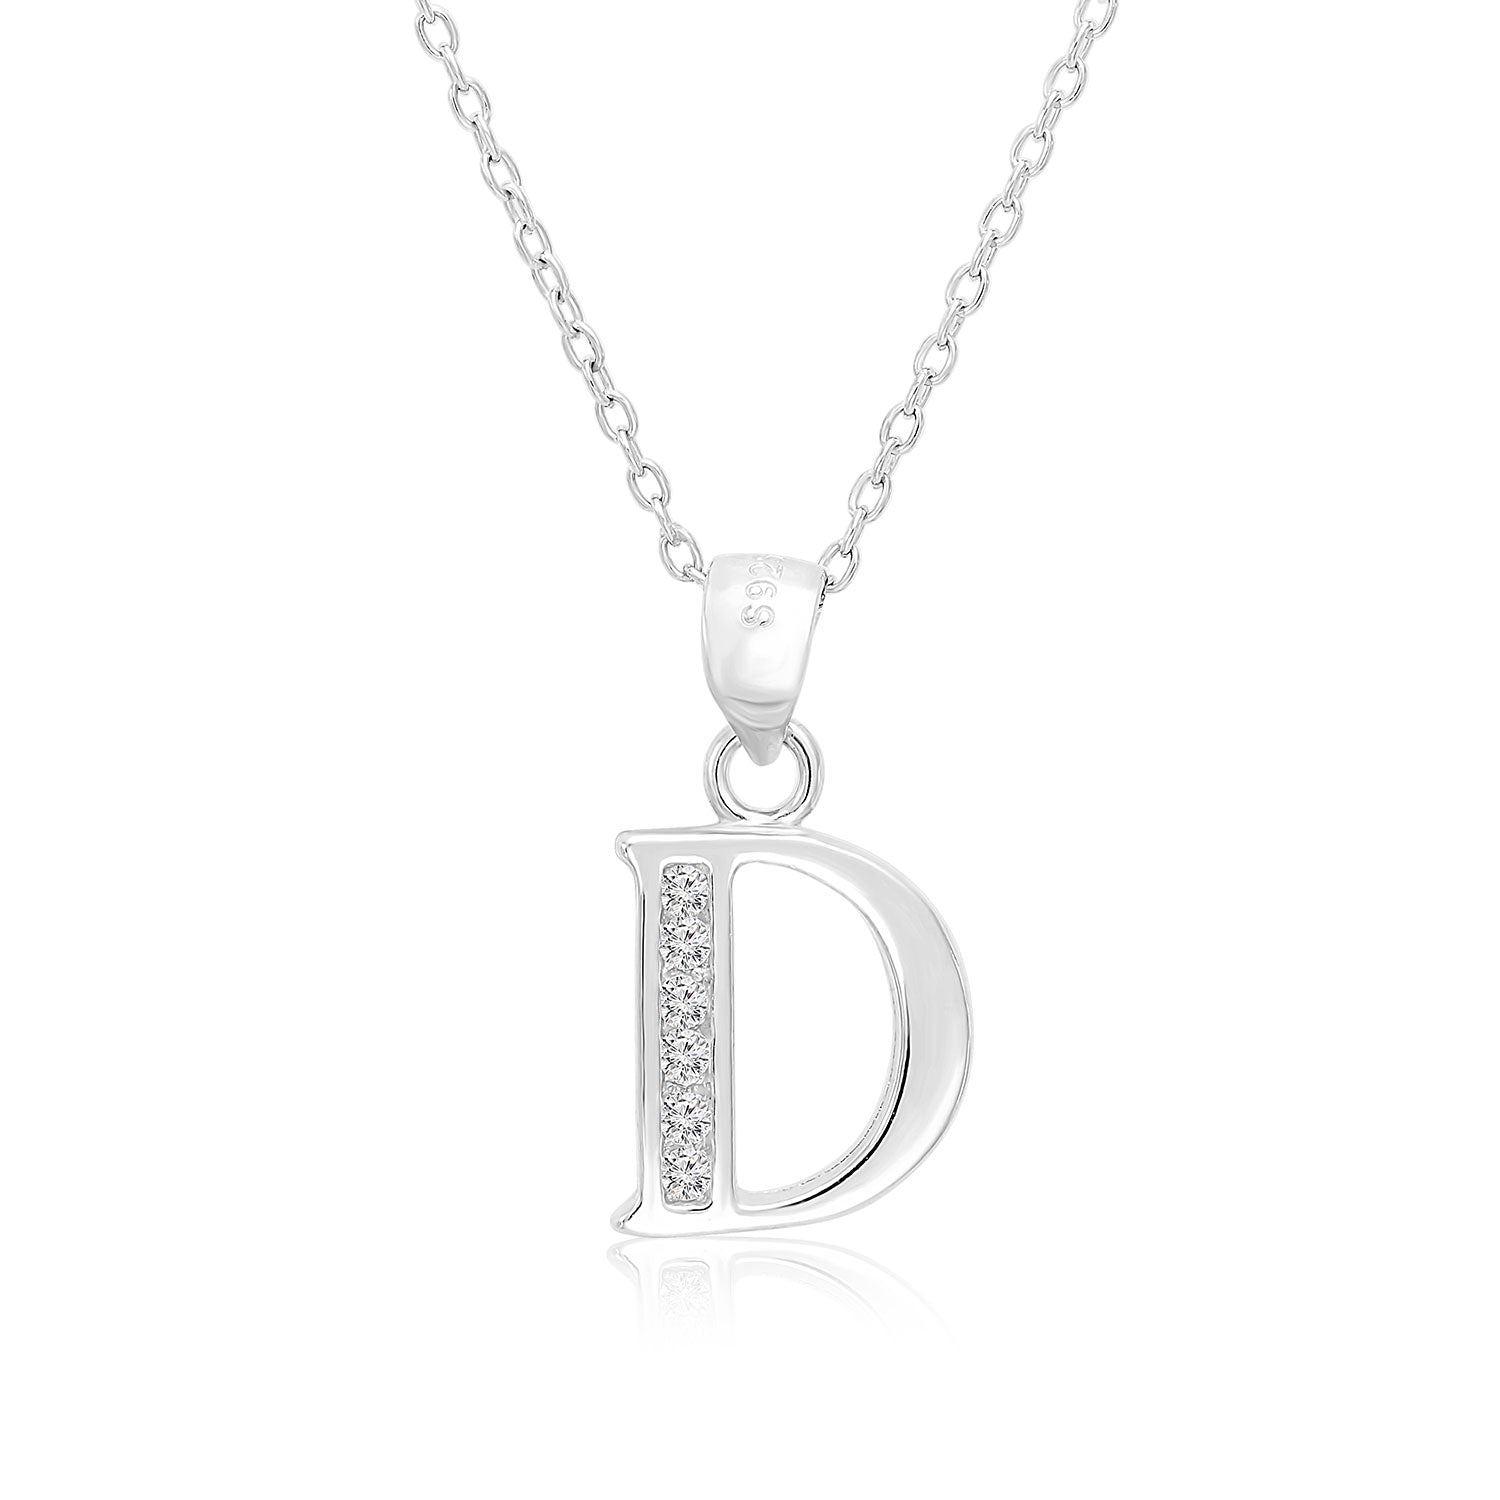 CZ Initial Charm Necklace, All Letters in Sterling Silver